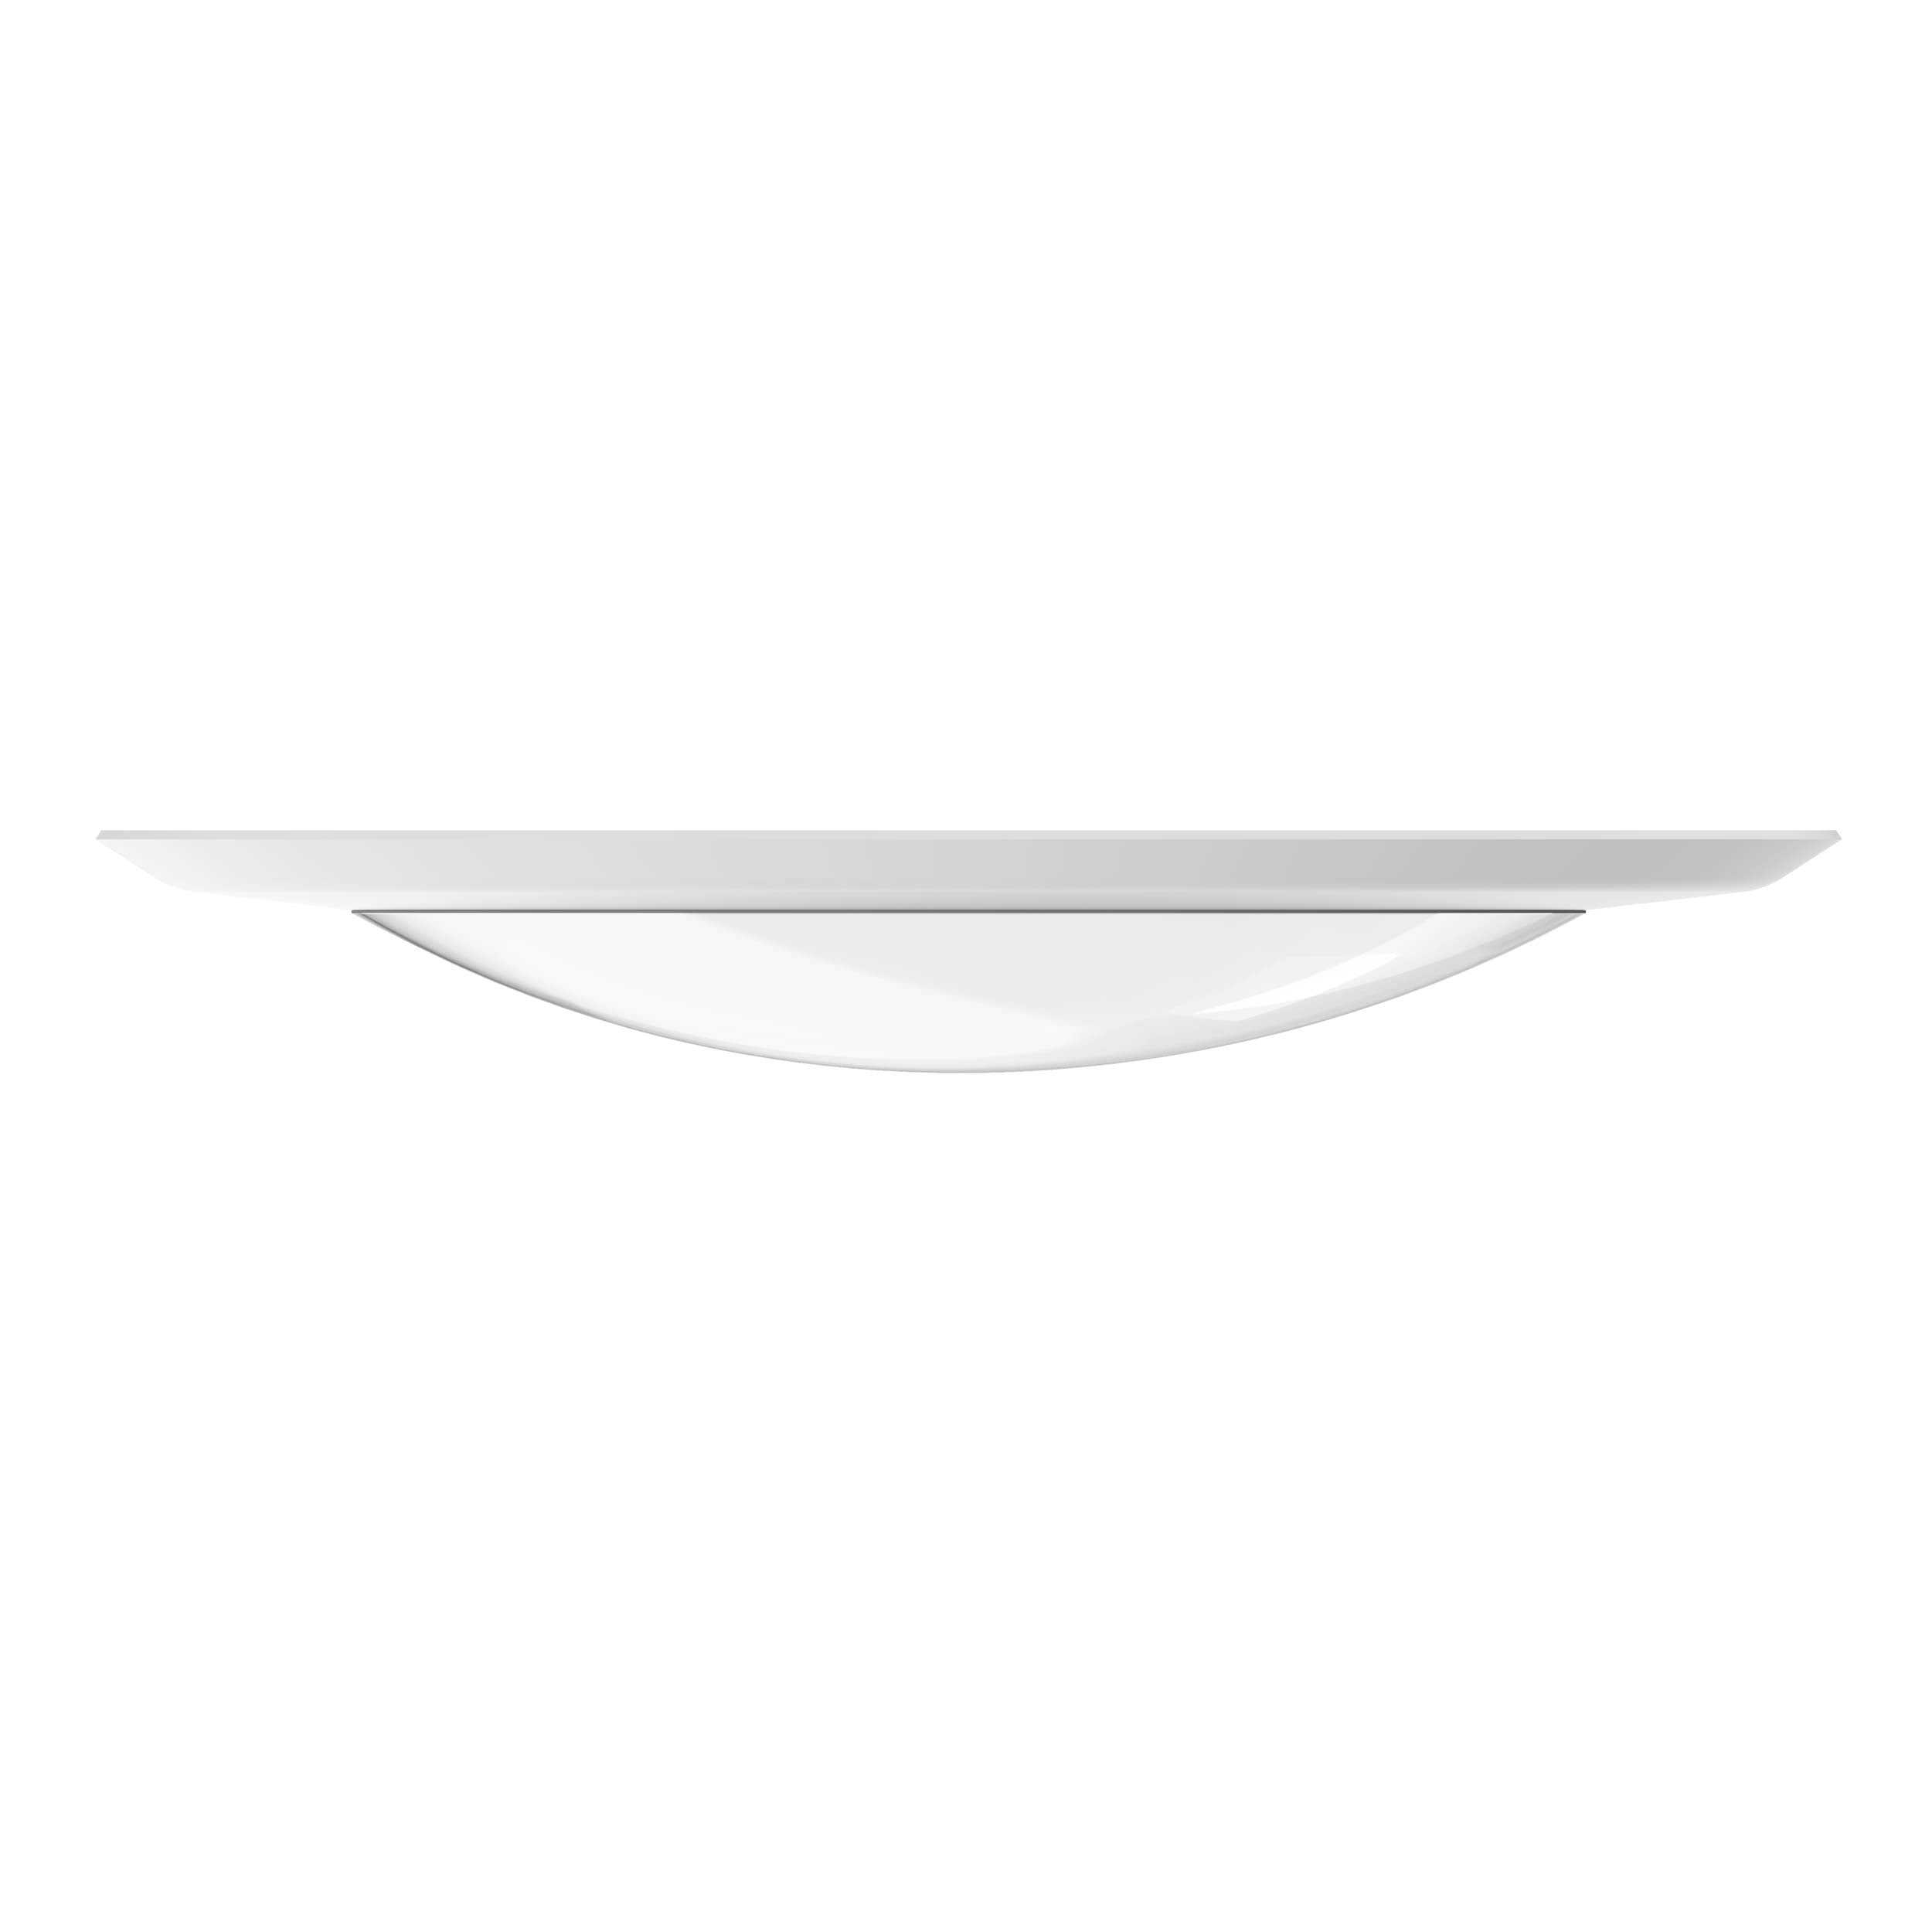 Dome lens and slim profile creates a streamlined look that blends seamlessly into the ceiling.